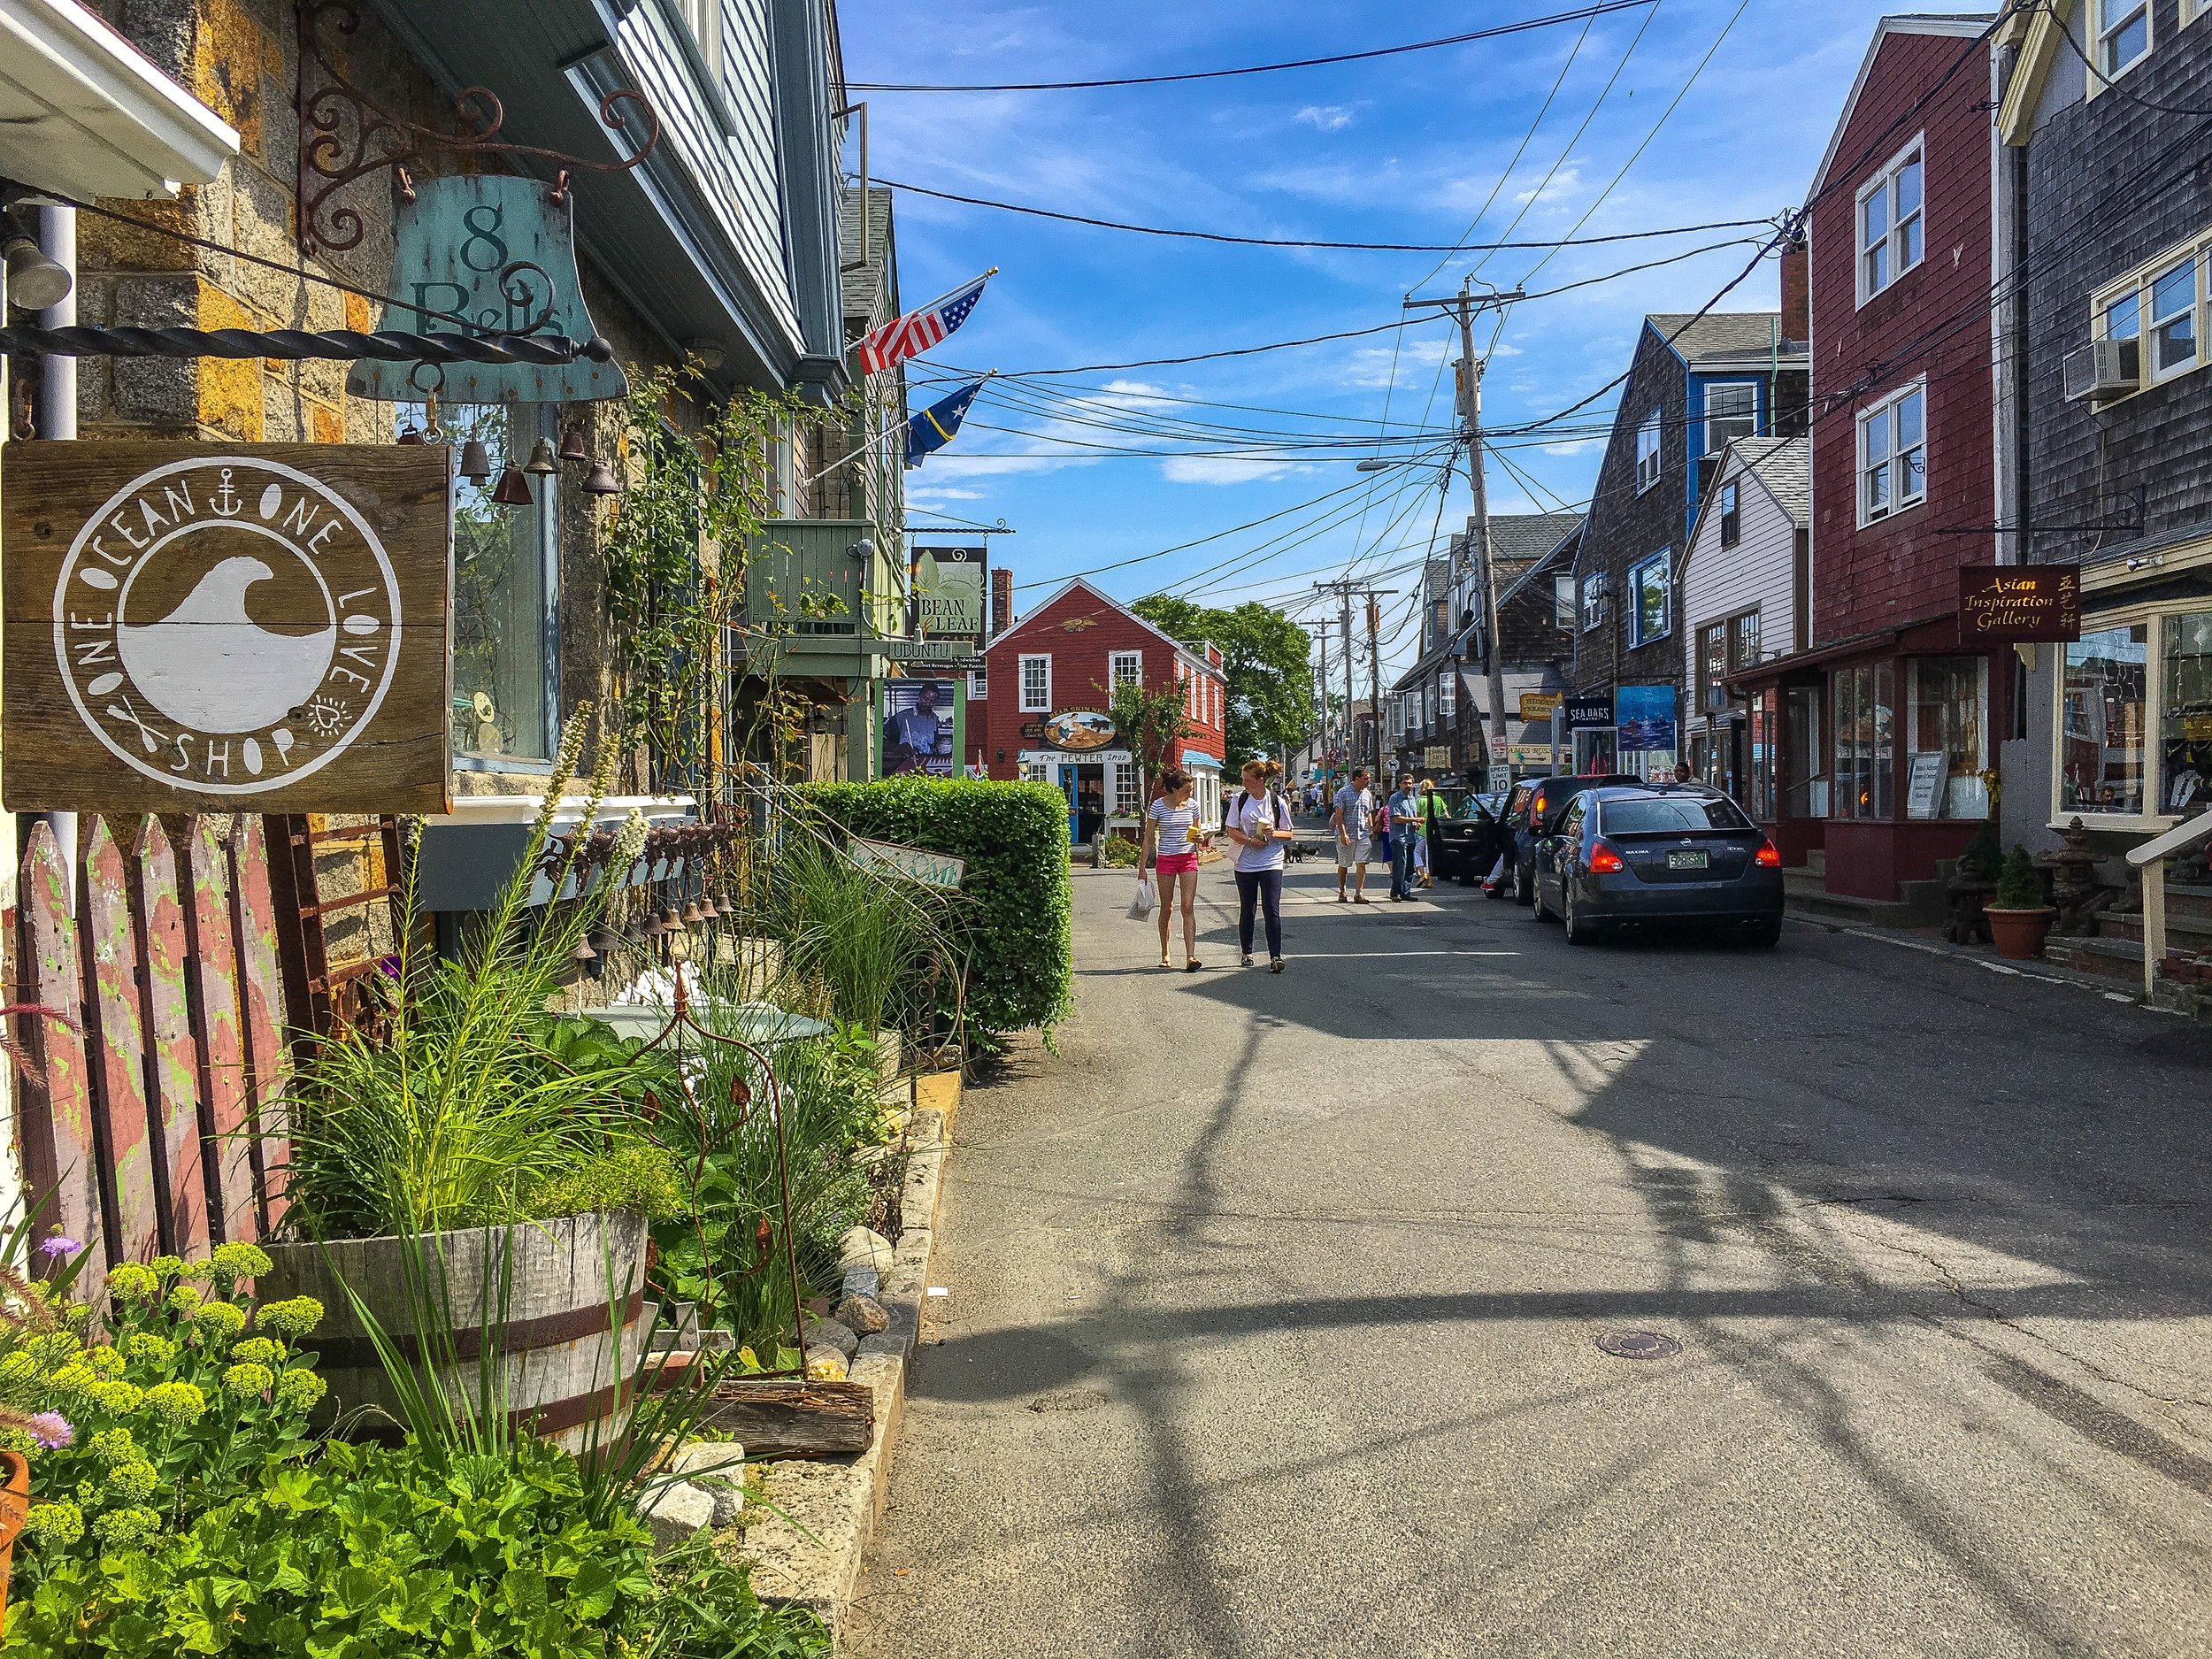 The Top 5 Reasons to Visit Rockport, Massachusetts Now